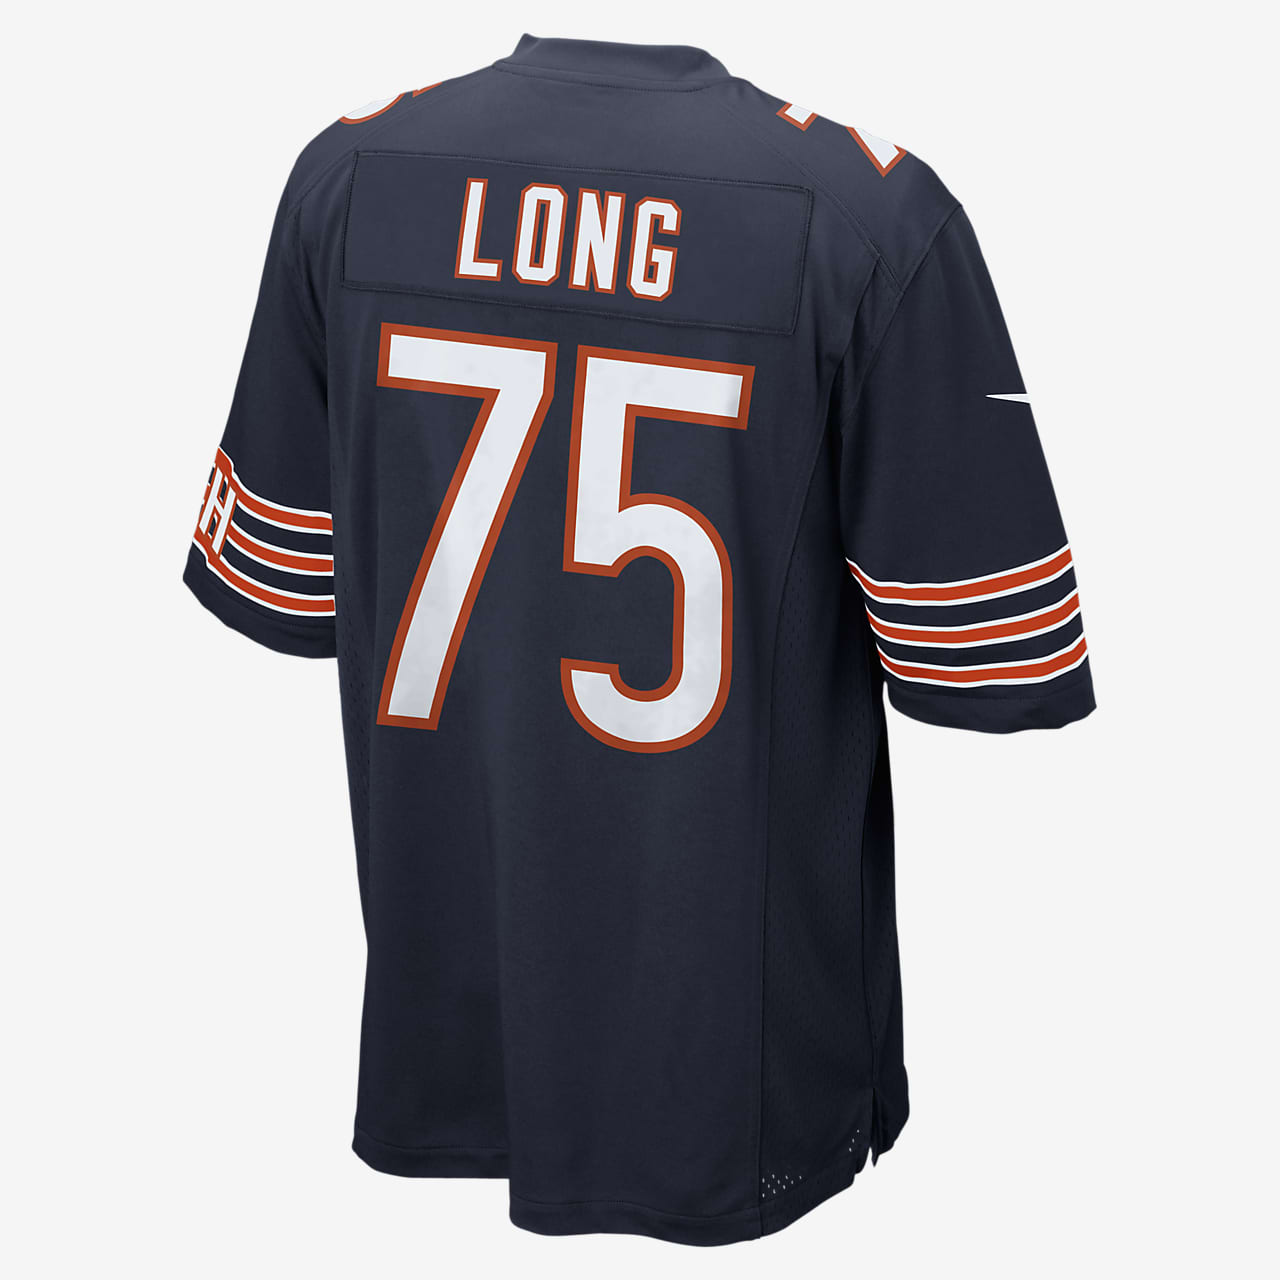 kyle long jersey number